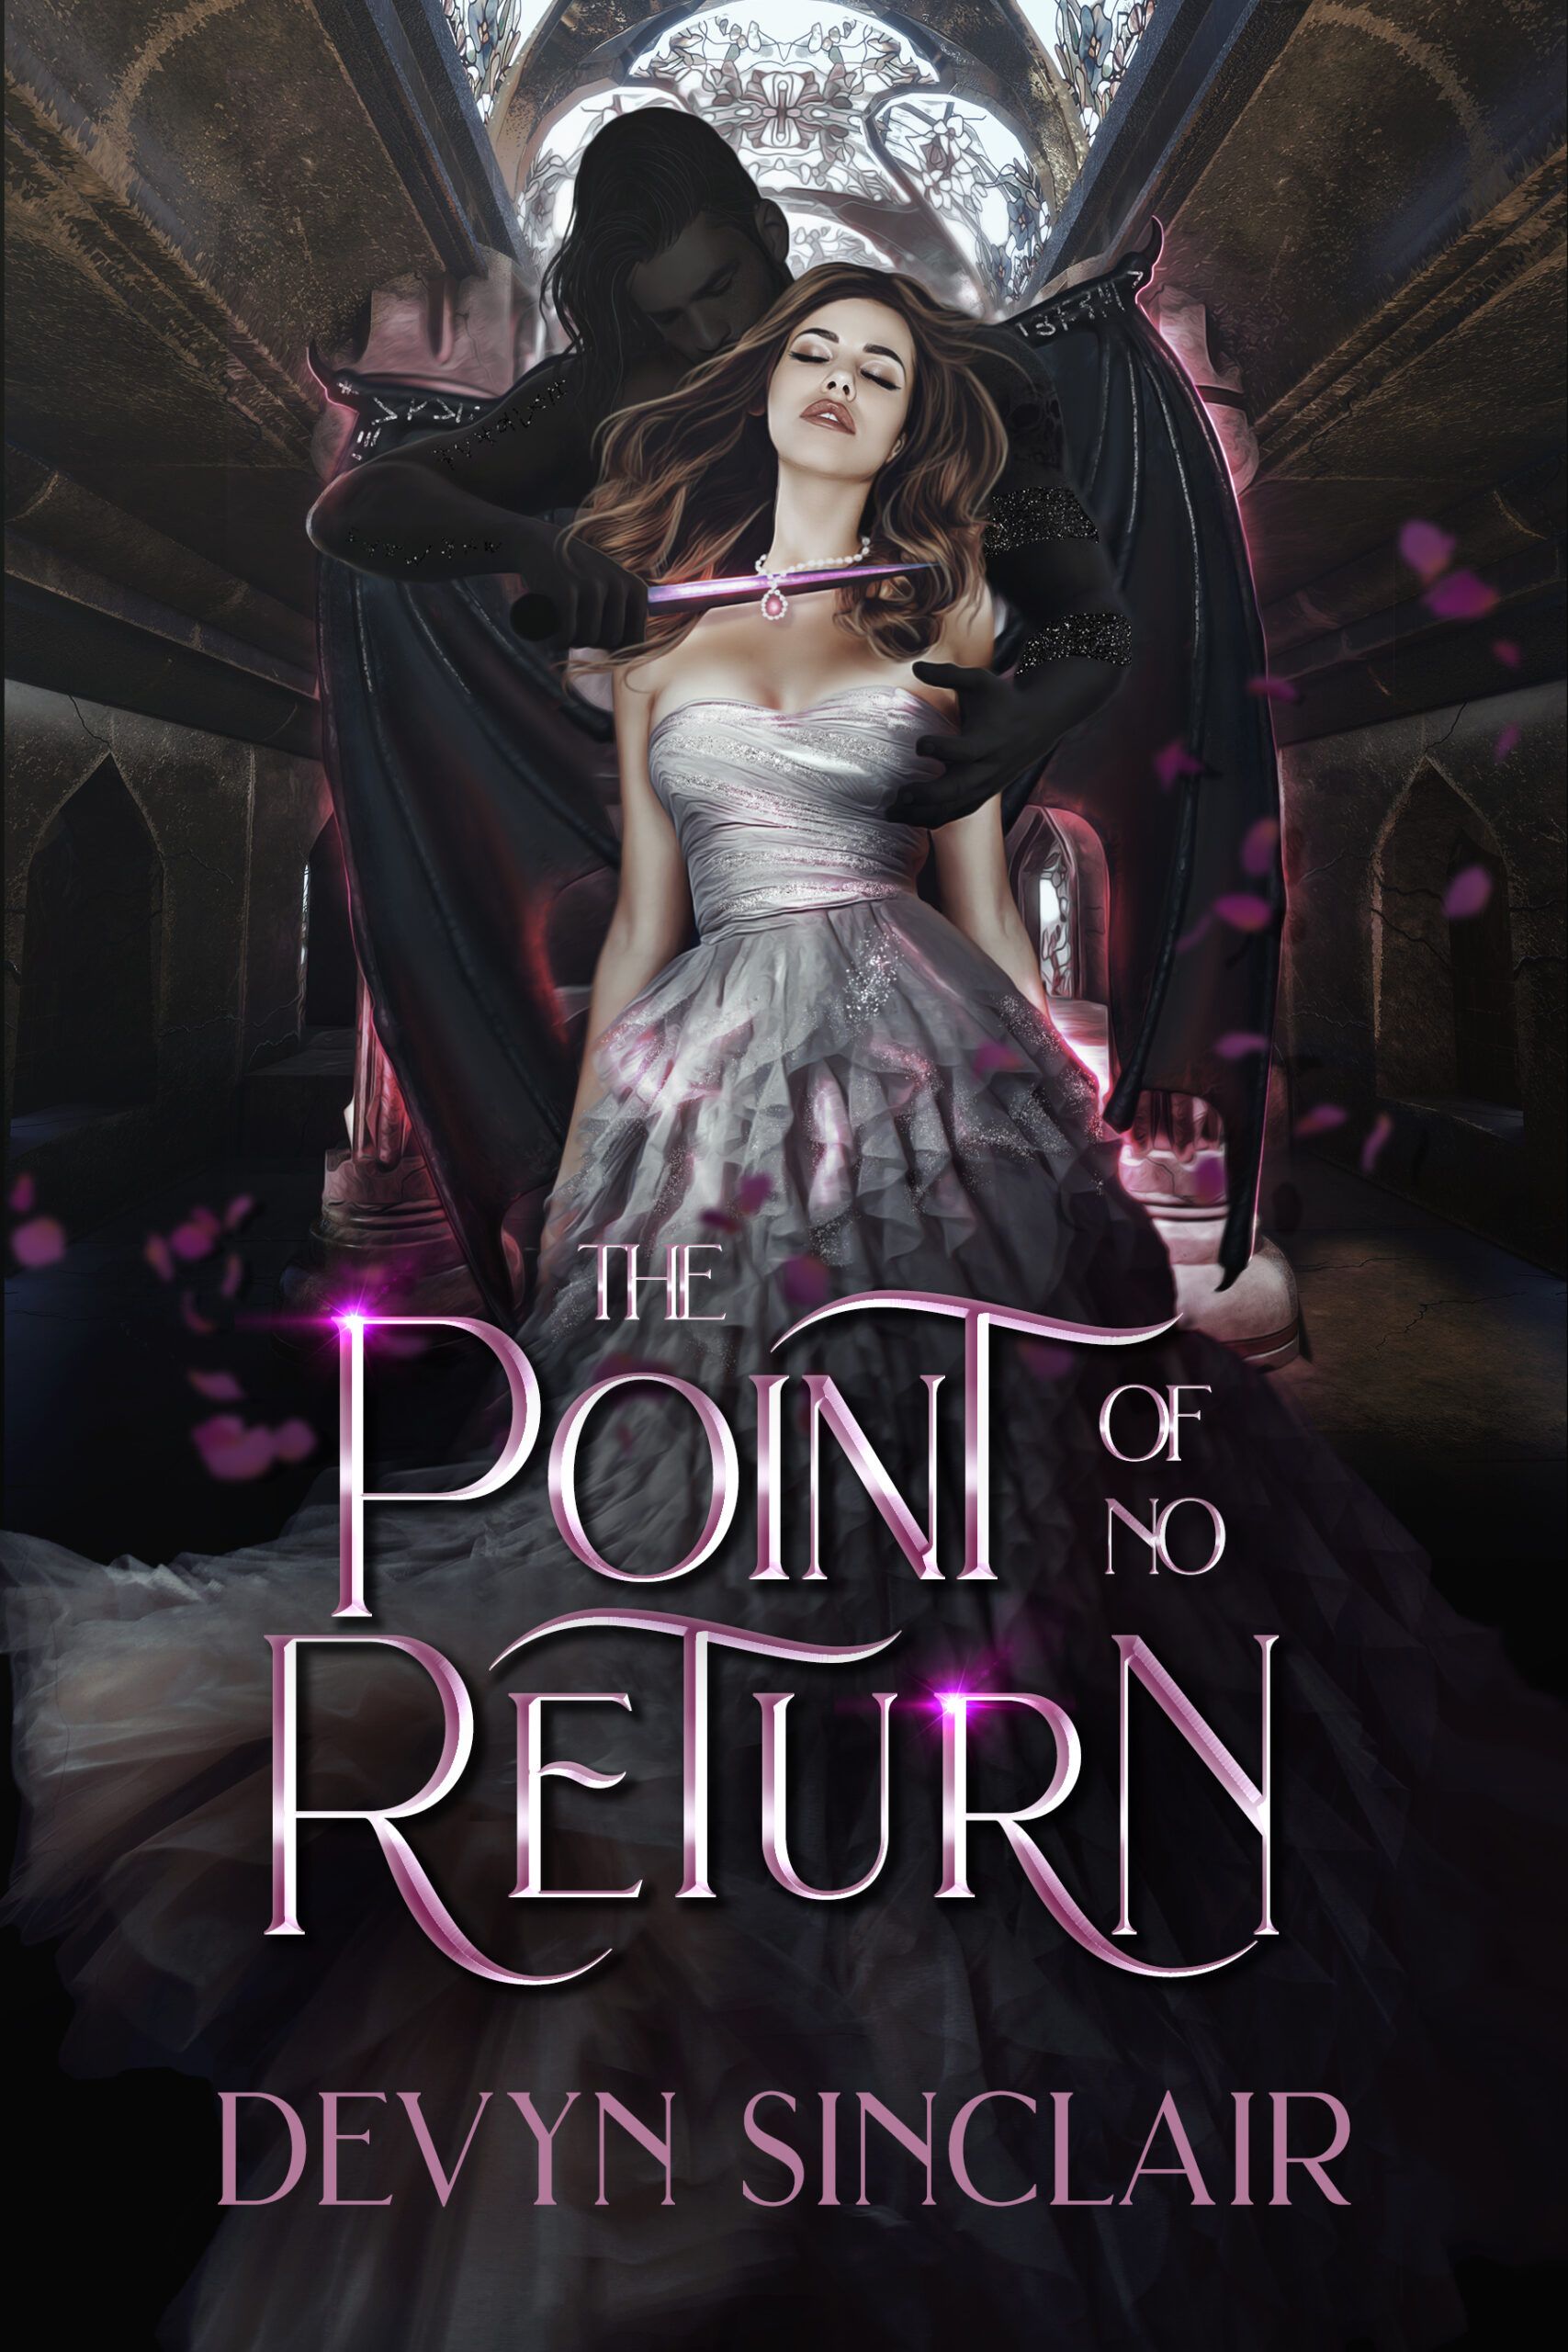 Cover of The Point of No Return